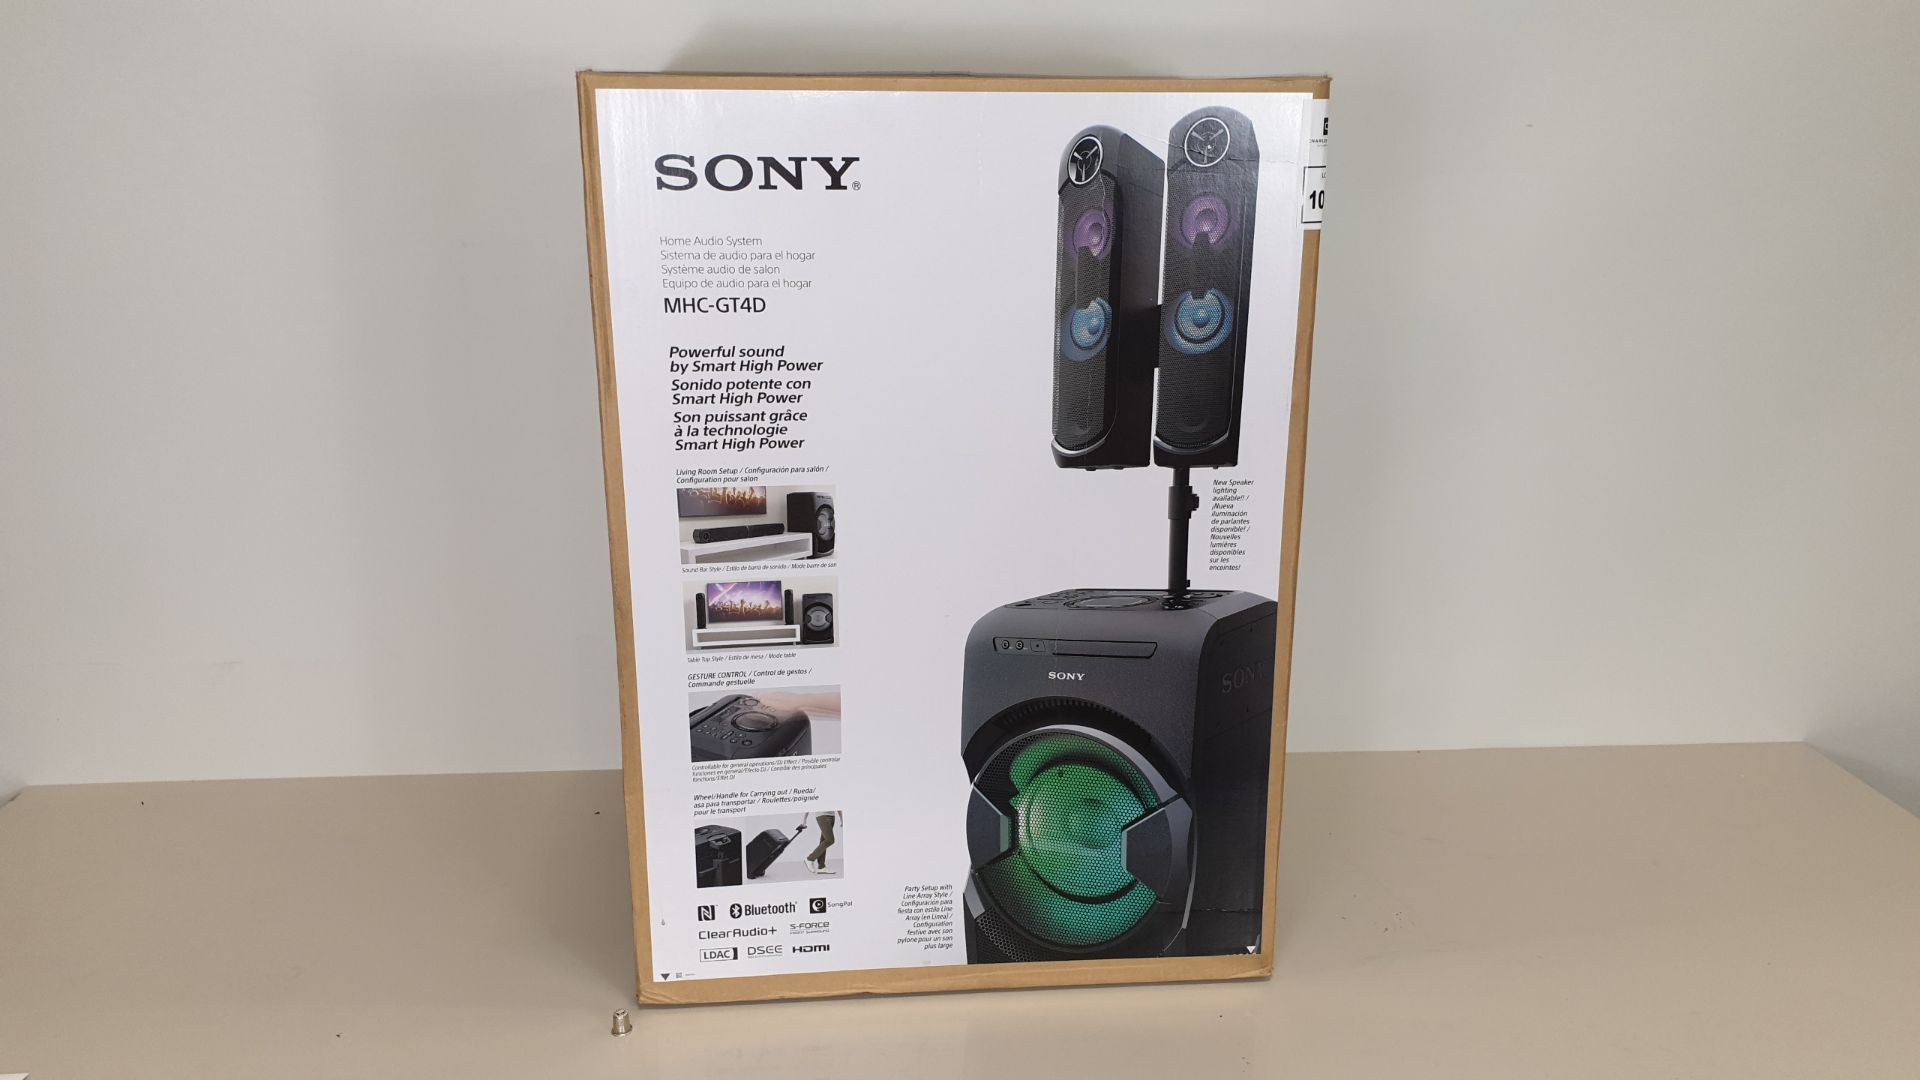 BRAND NEW AND BOXED SONY MHC-GT4D POWERFUL SOUND BY SMART HIGH POWER